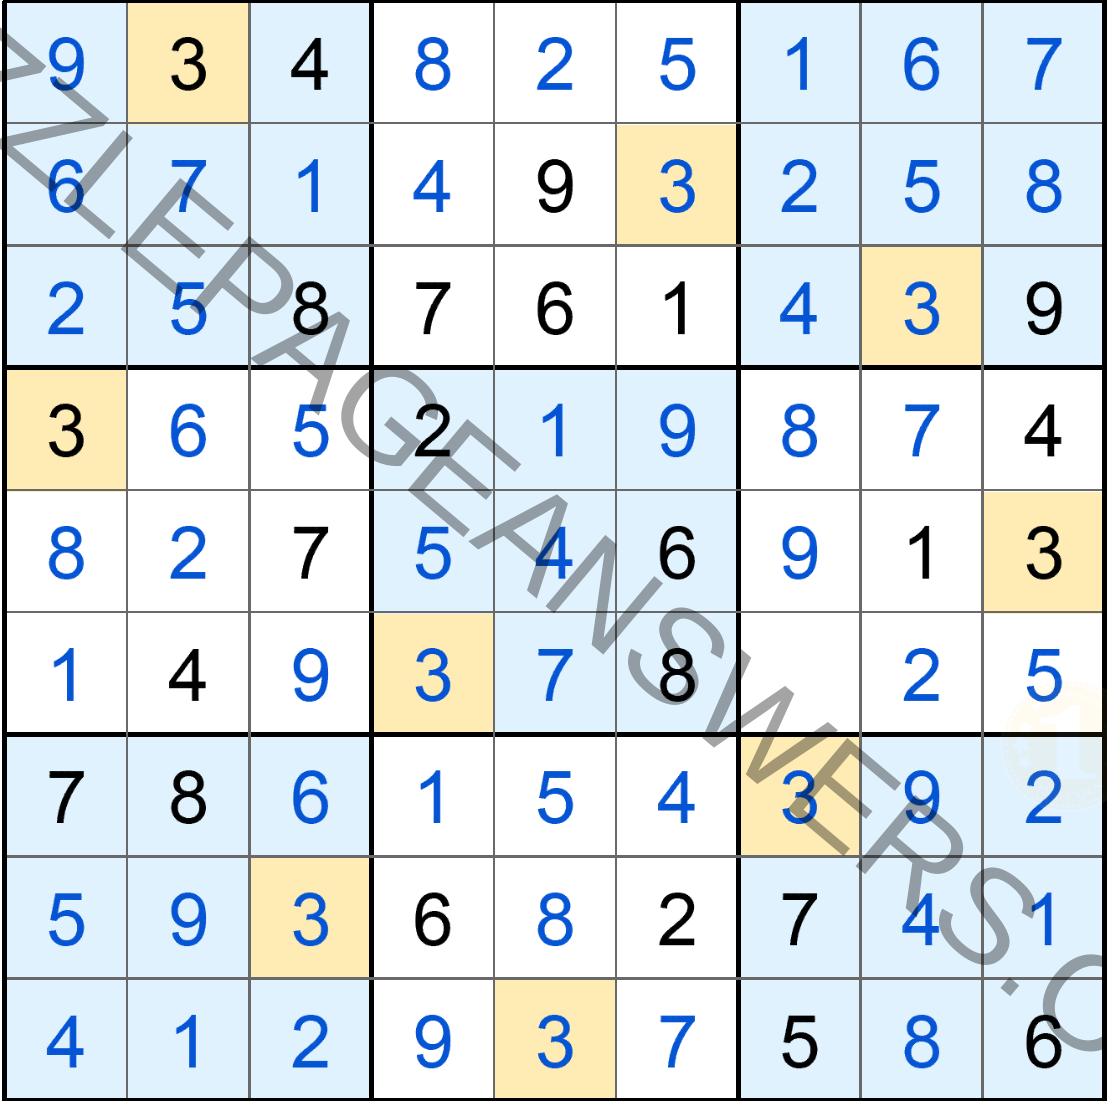 Puzzle Page Sudoku December 6 2020 Answers Puzzle Page Answers